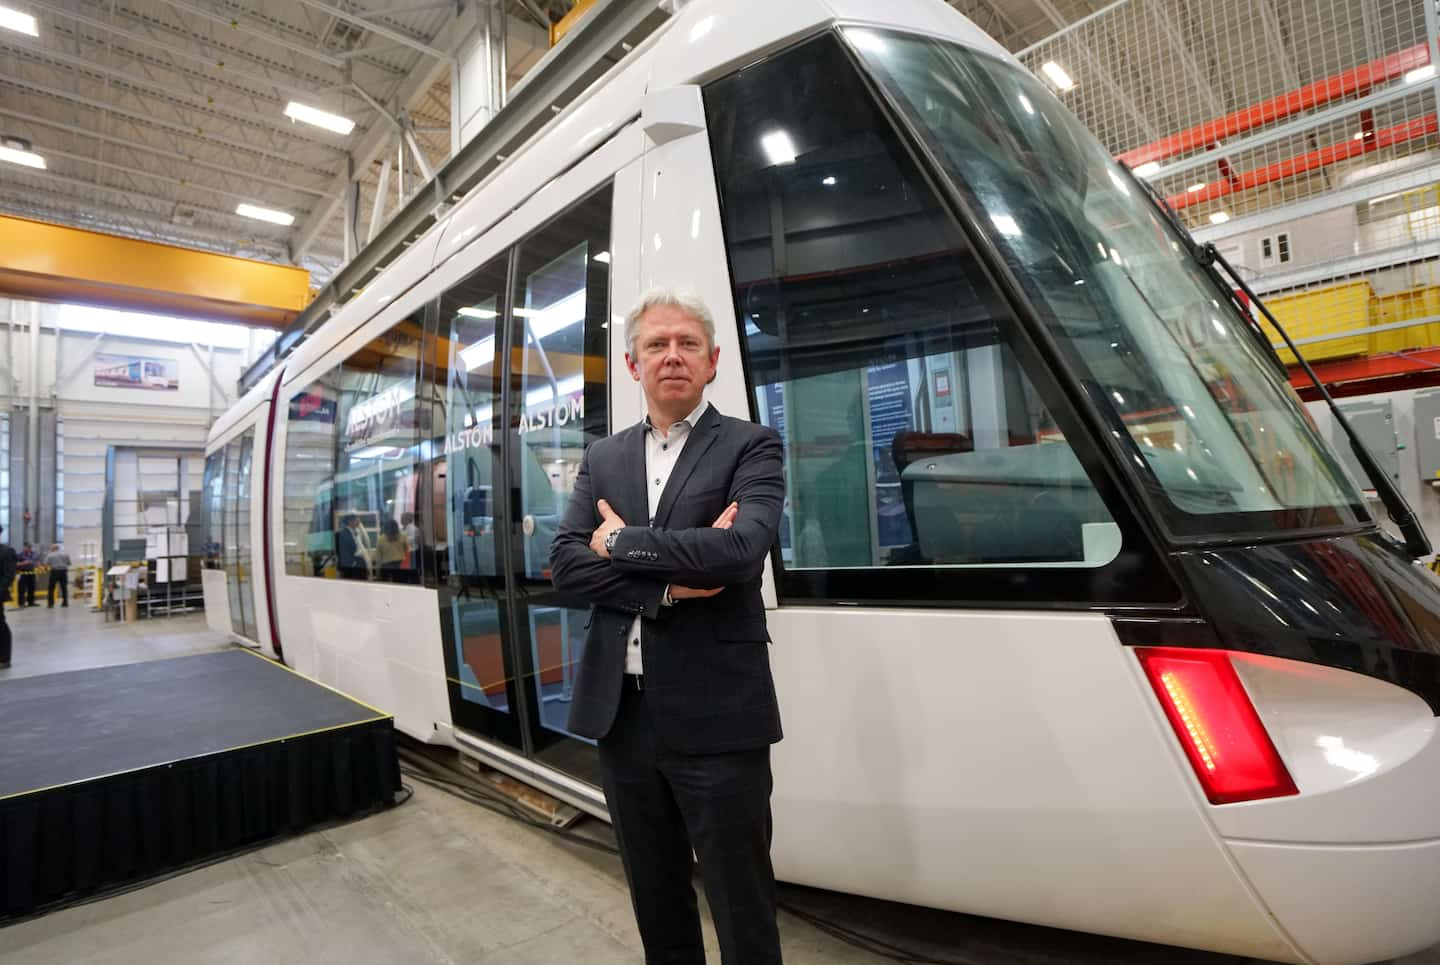 Local engineers will imagine the hydrogen trains of tomorrow